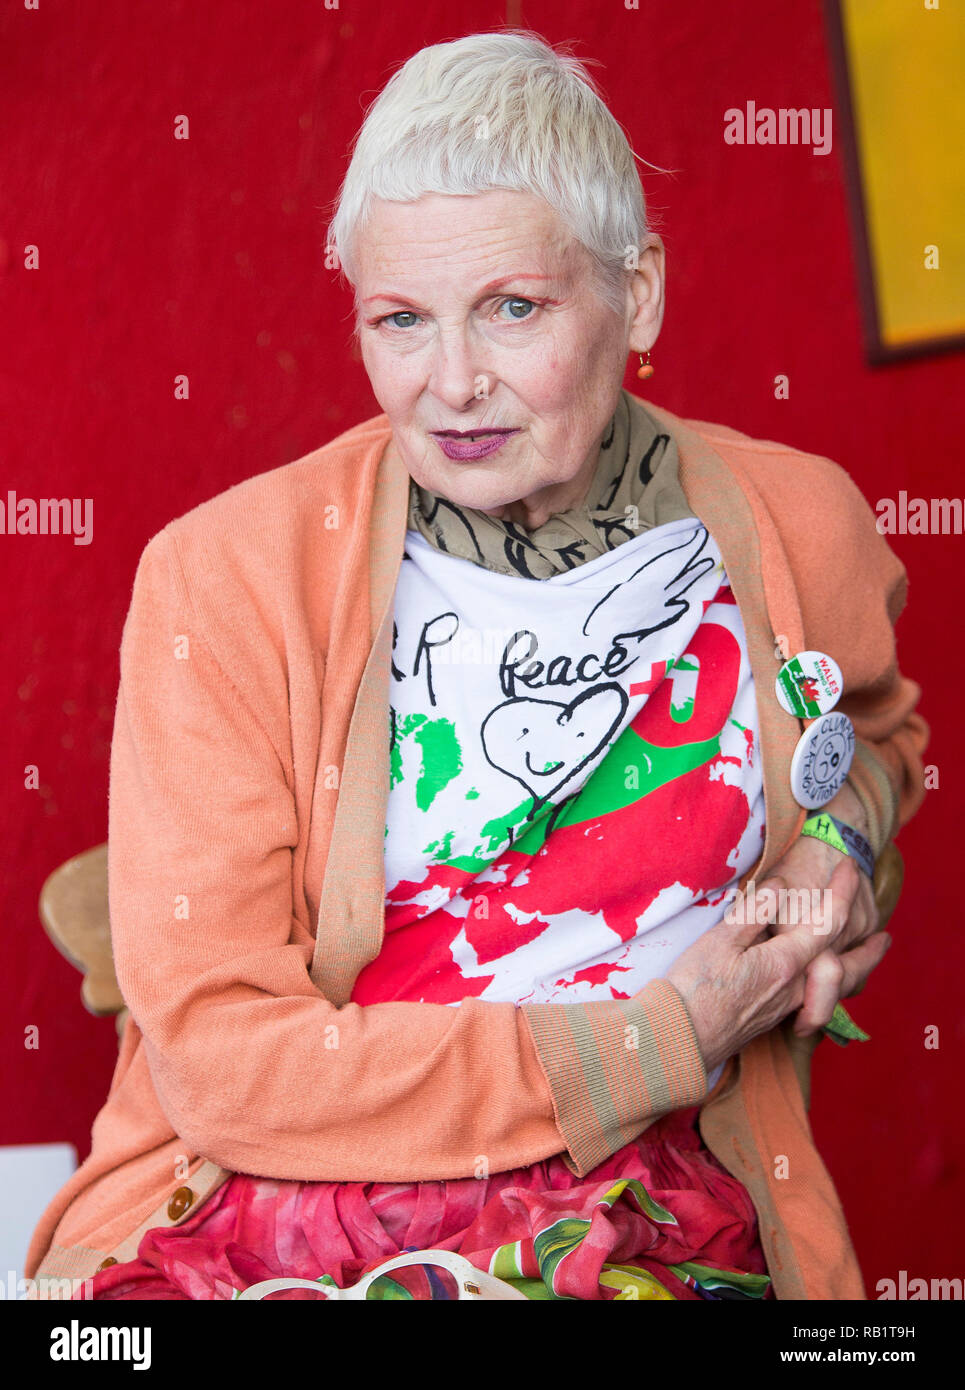 Vivienne Westwood: punk, new romantic and beyond · V&A